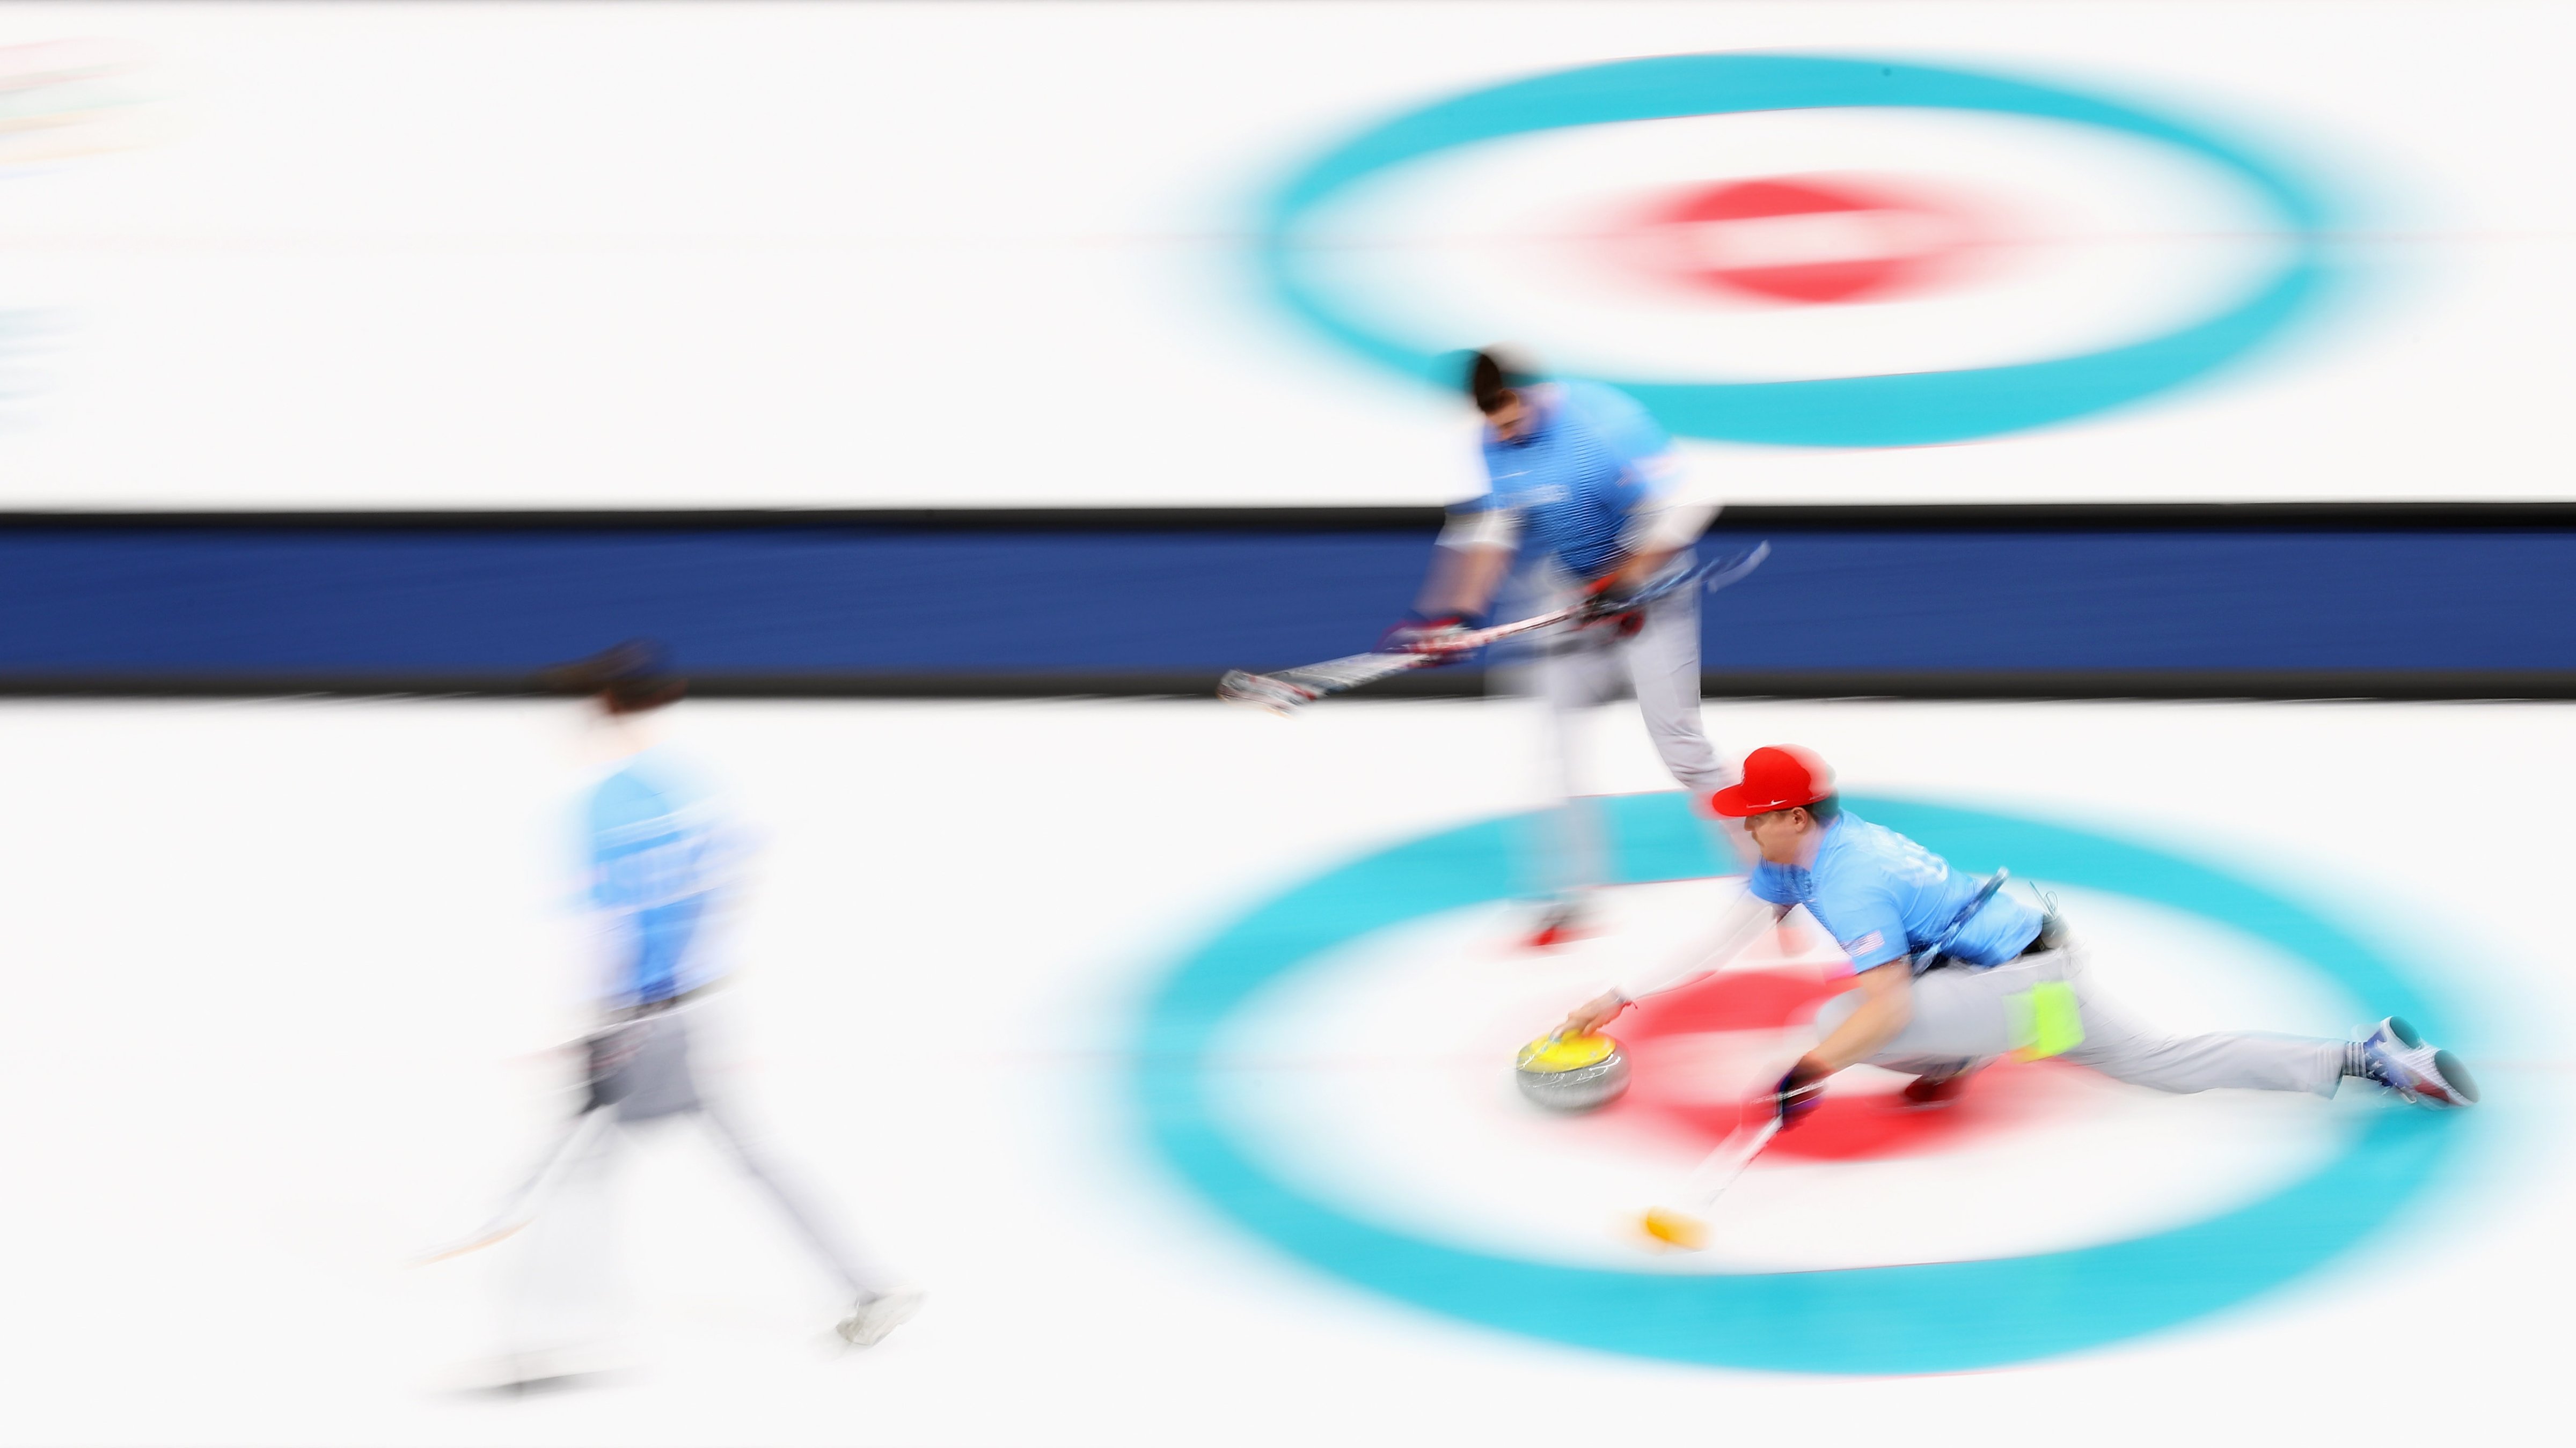 Team USA will go on to play Sweden for the curling gold medal after beating Canada. (Dean Mouhtaropoulos—Getty Images)